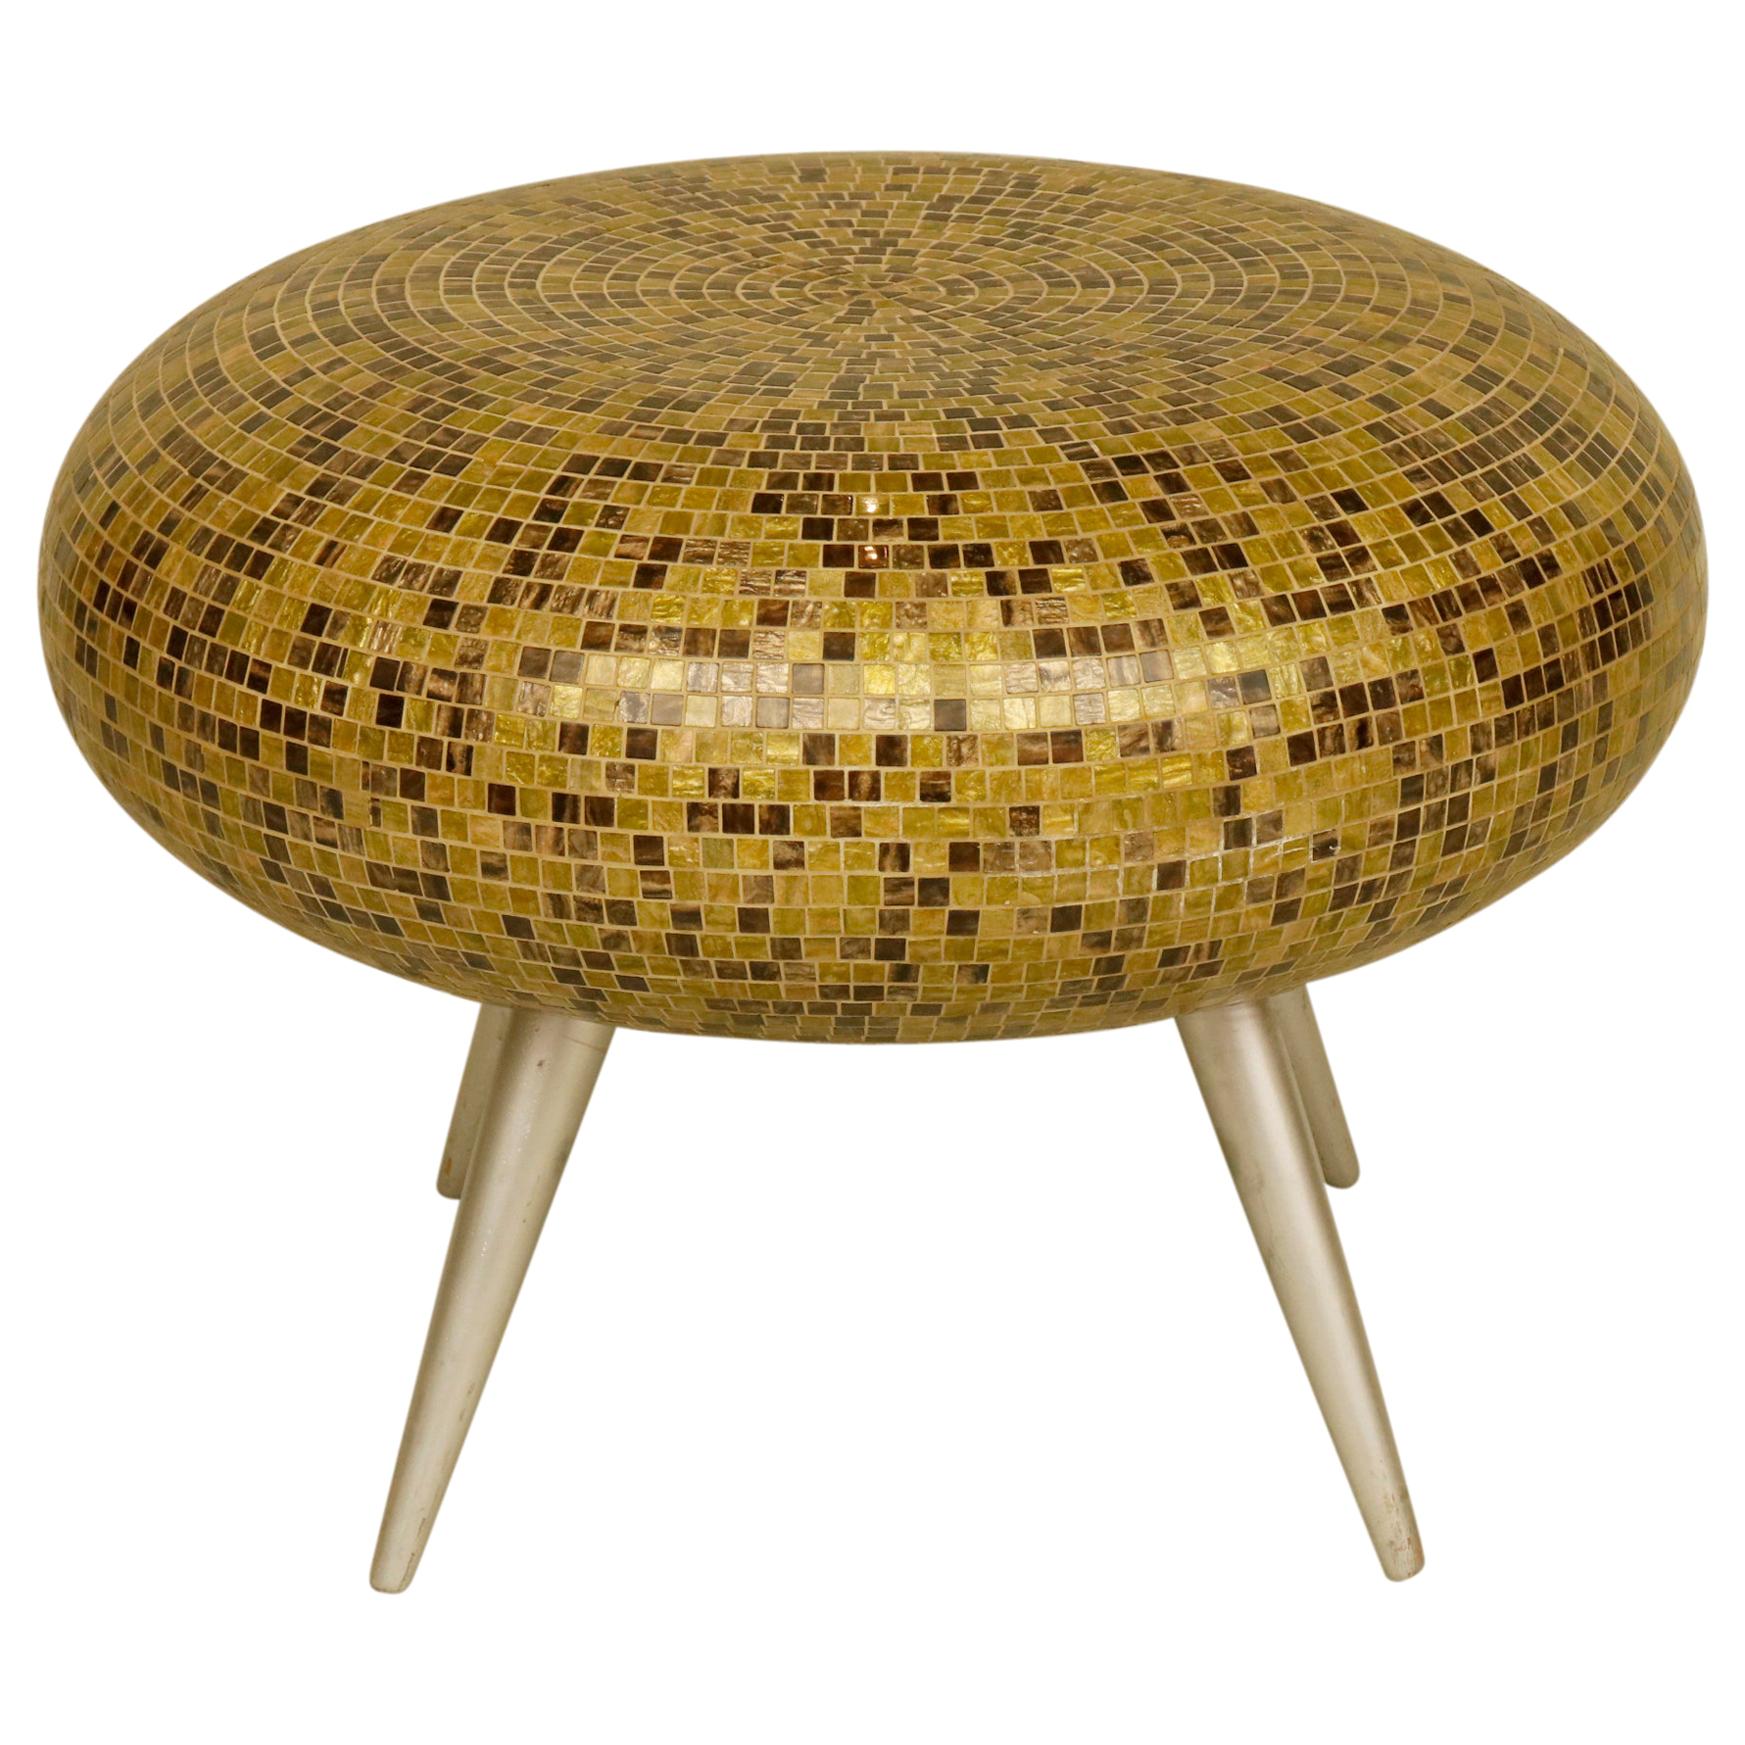 Unusual Pouf with Mosaics